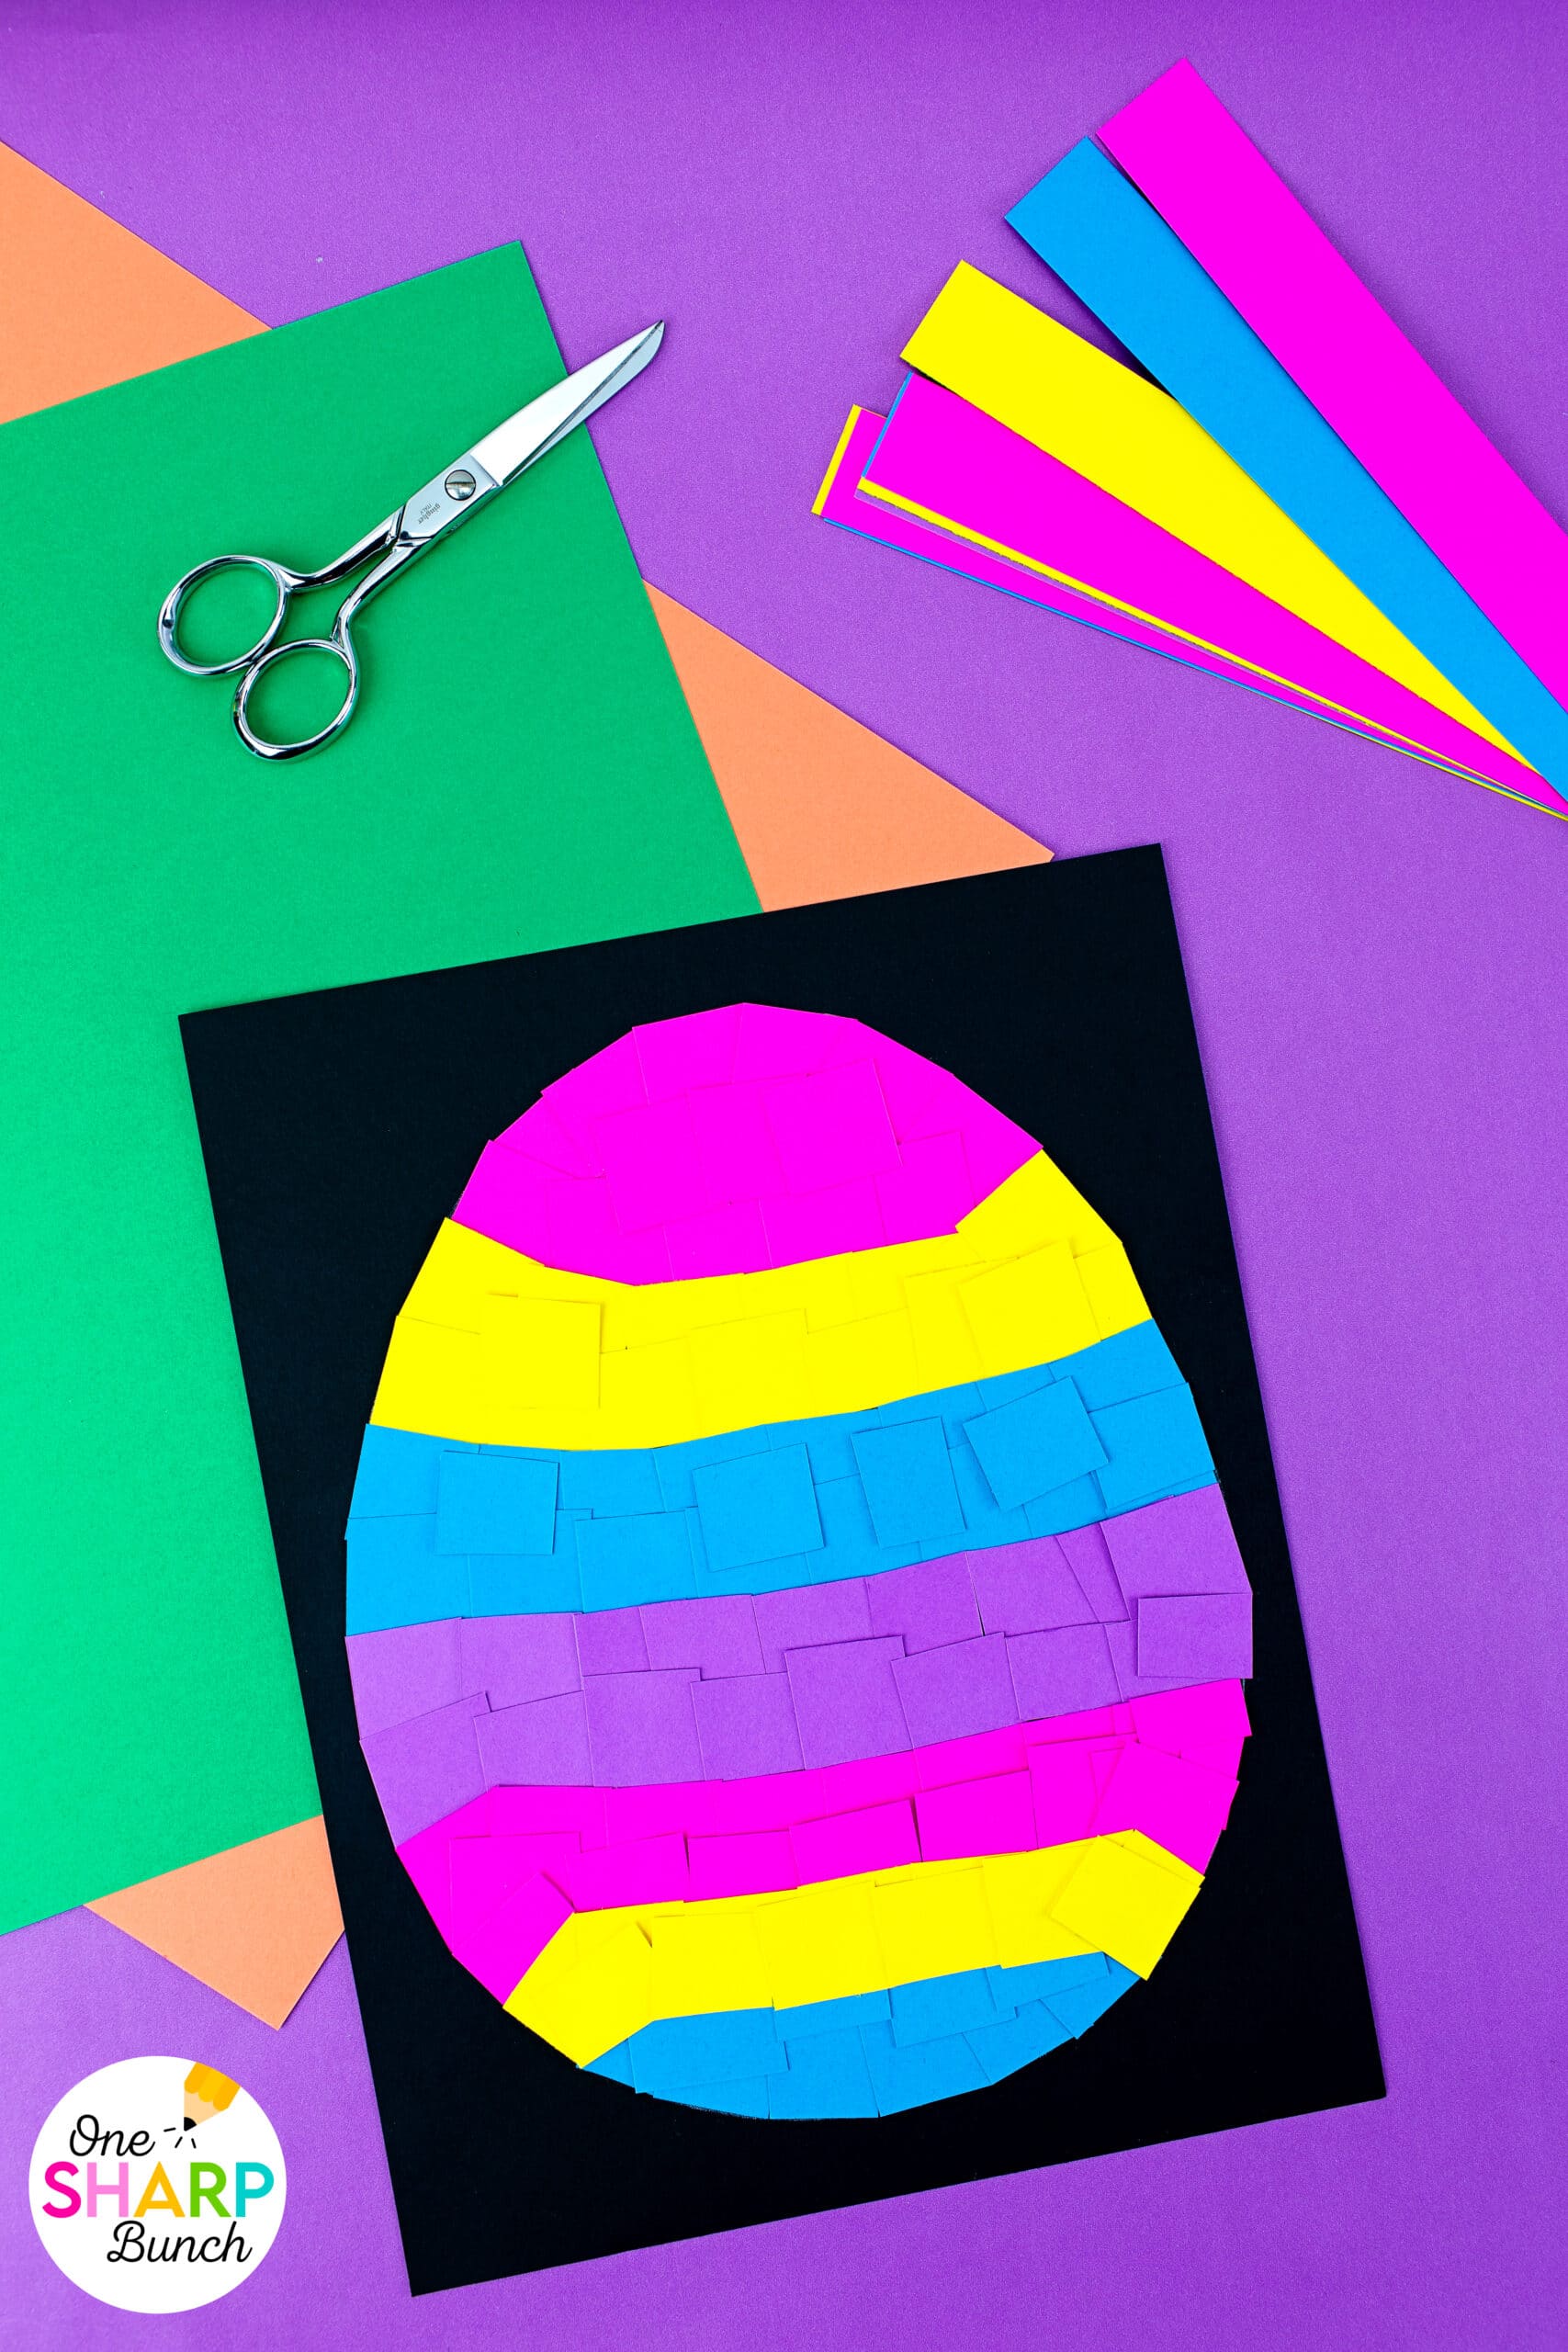 Embrace the arrival of spring, as you strengthen fine motor skills, with this simple mosaic Easter egg craft for kids! These Easter egg crafts are great for practicing scissor skills and gluing skills. Complete these Easter crafts for scissor cutting activities with preschool and kindergarten students. Try these Easter crafts for kids as easy spring activities for Easter centers or spring fine motor activities. Plus, pair these spring crafts with any of your favorite Easter books for kids!